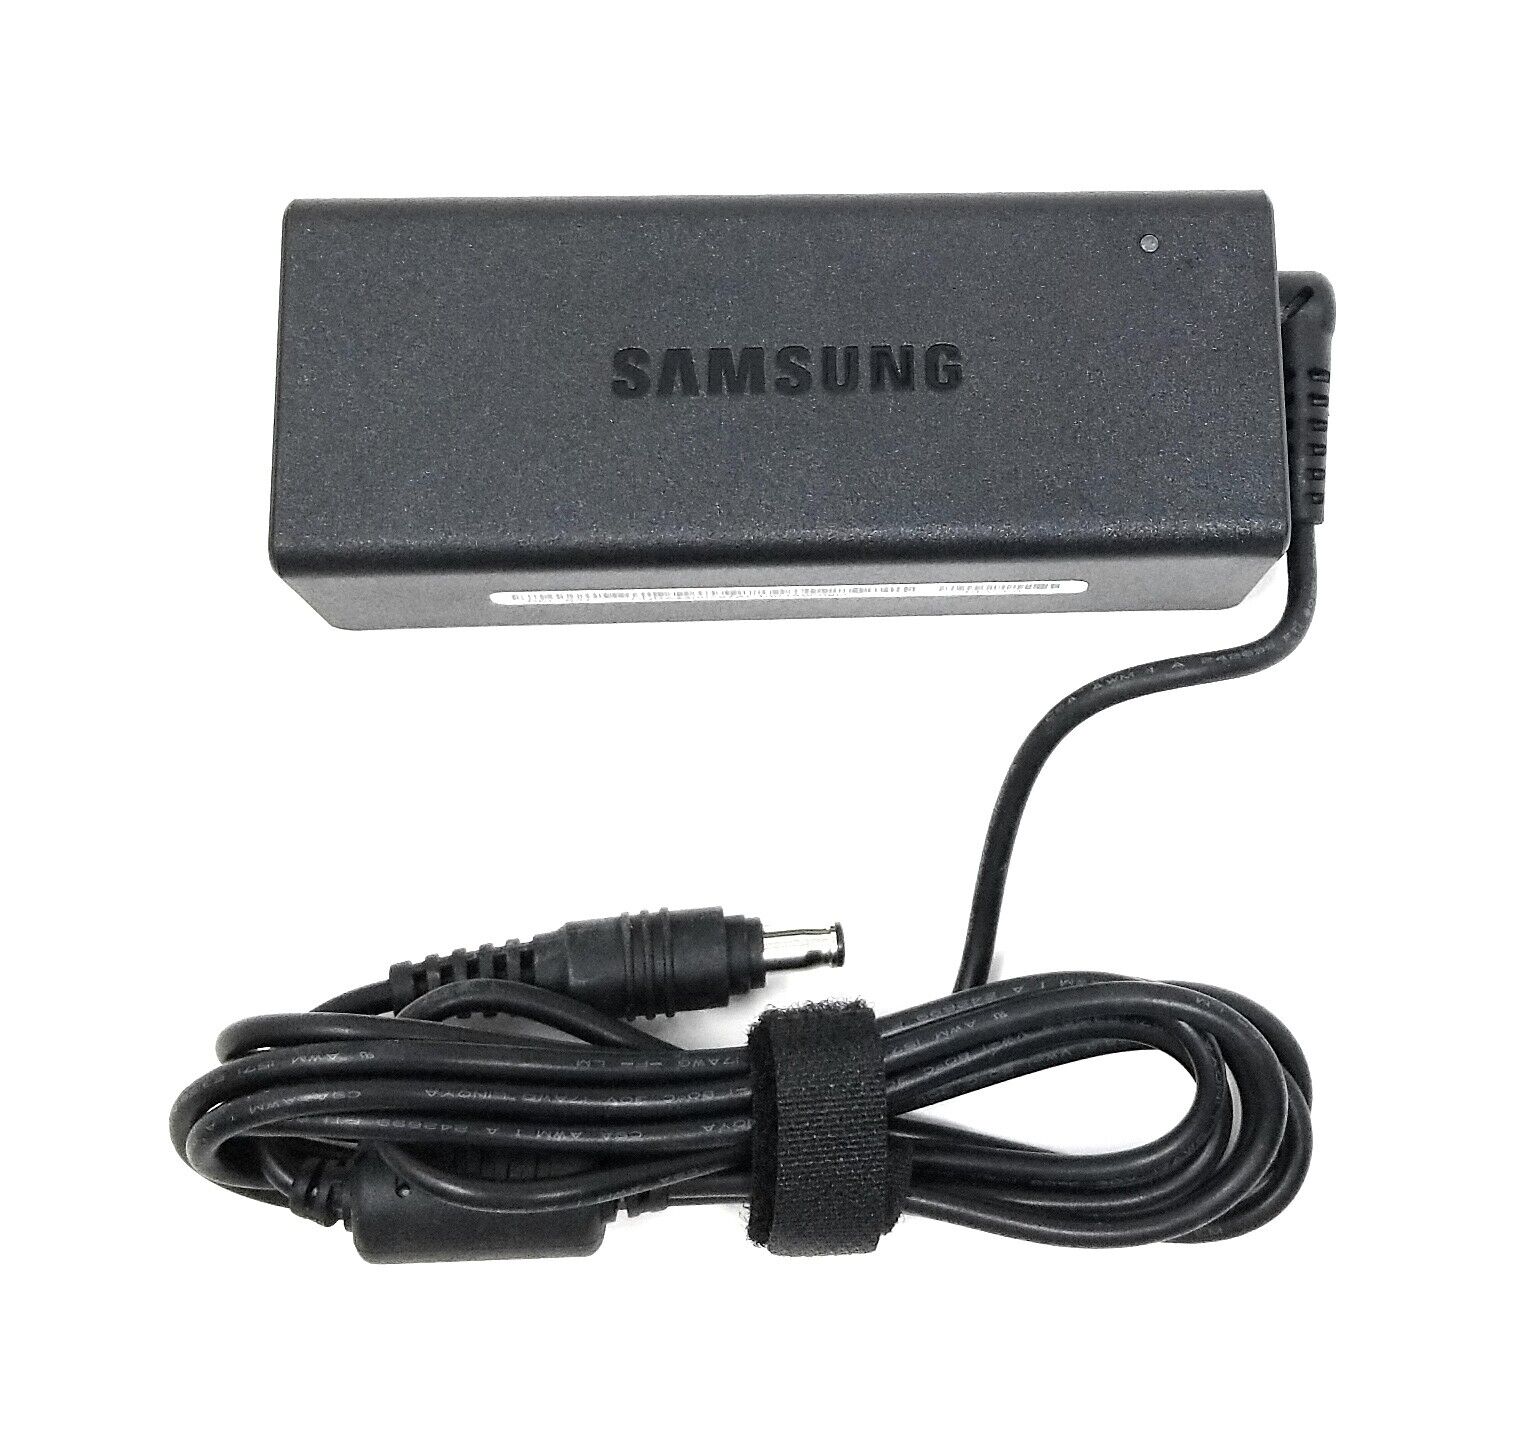 Genuine Samsung AC Power Adapter AD-6019B PSCV600122B 19V 3.16A Laptop Charger